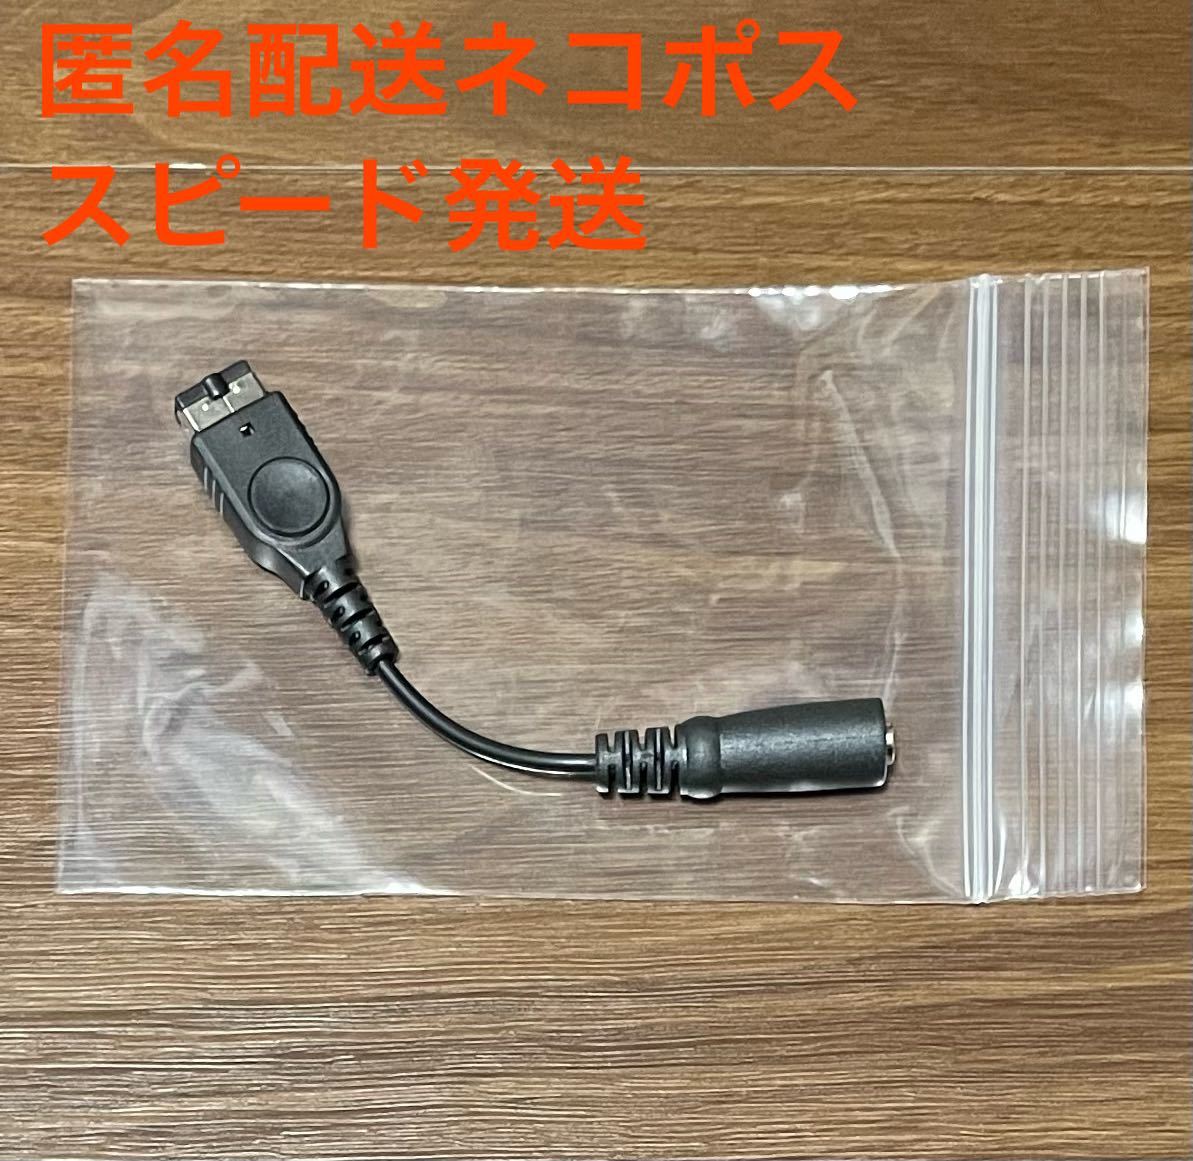  Game Boy Advance SP for stereo earphone connection cable ②